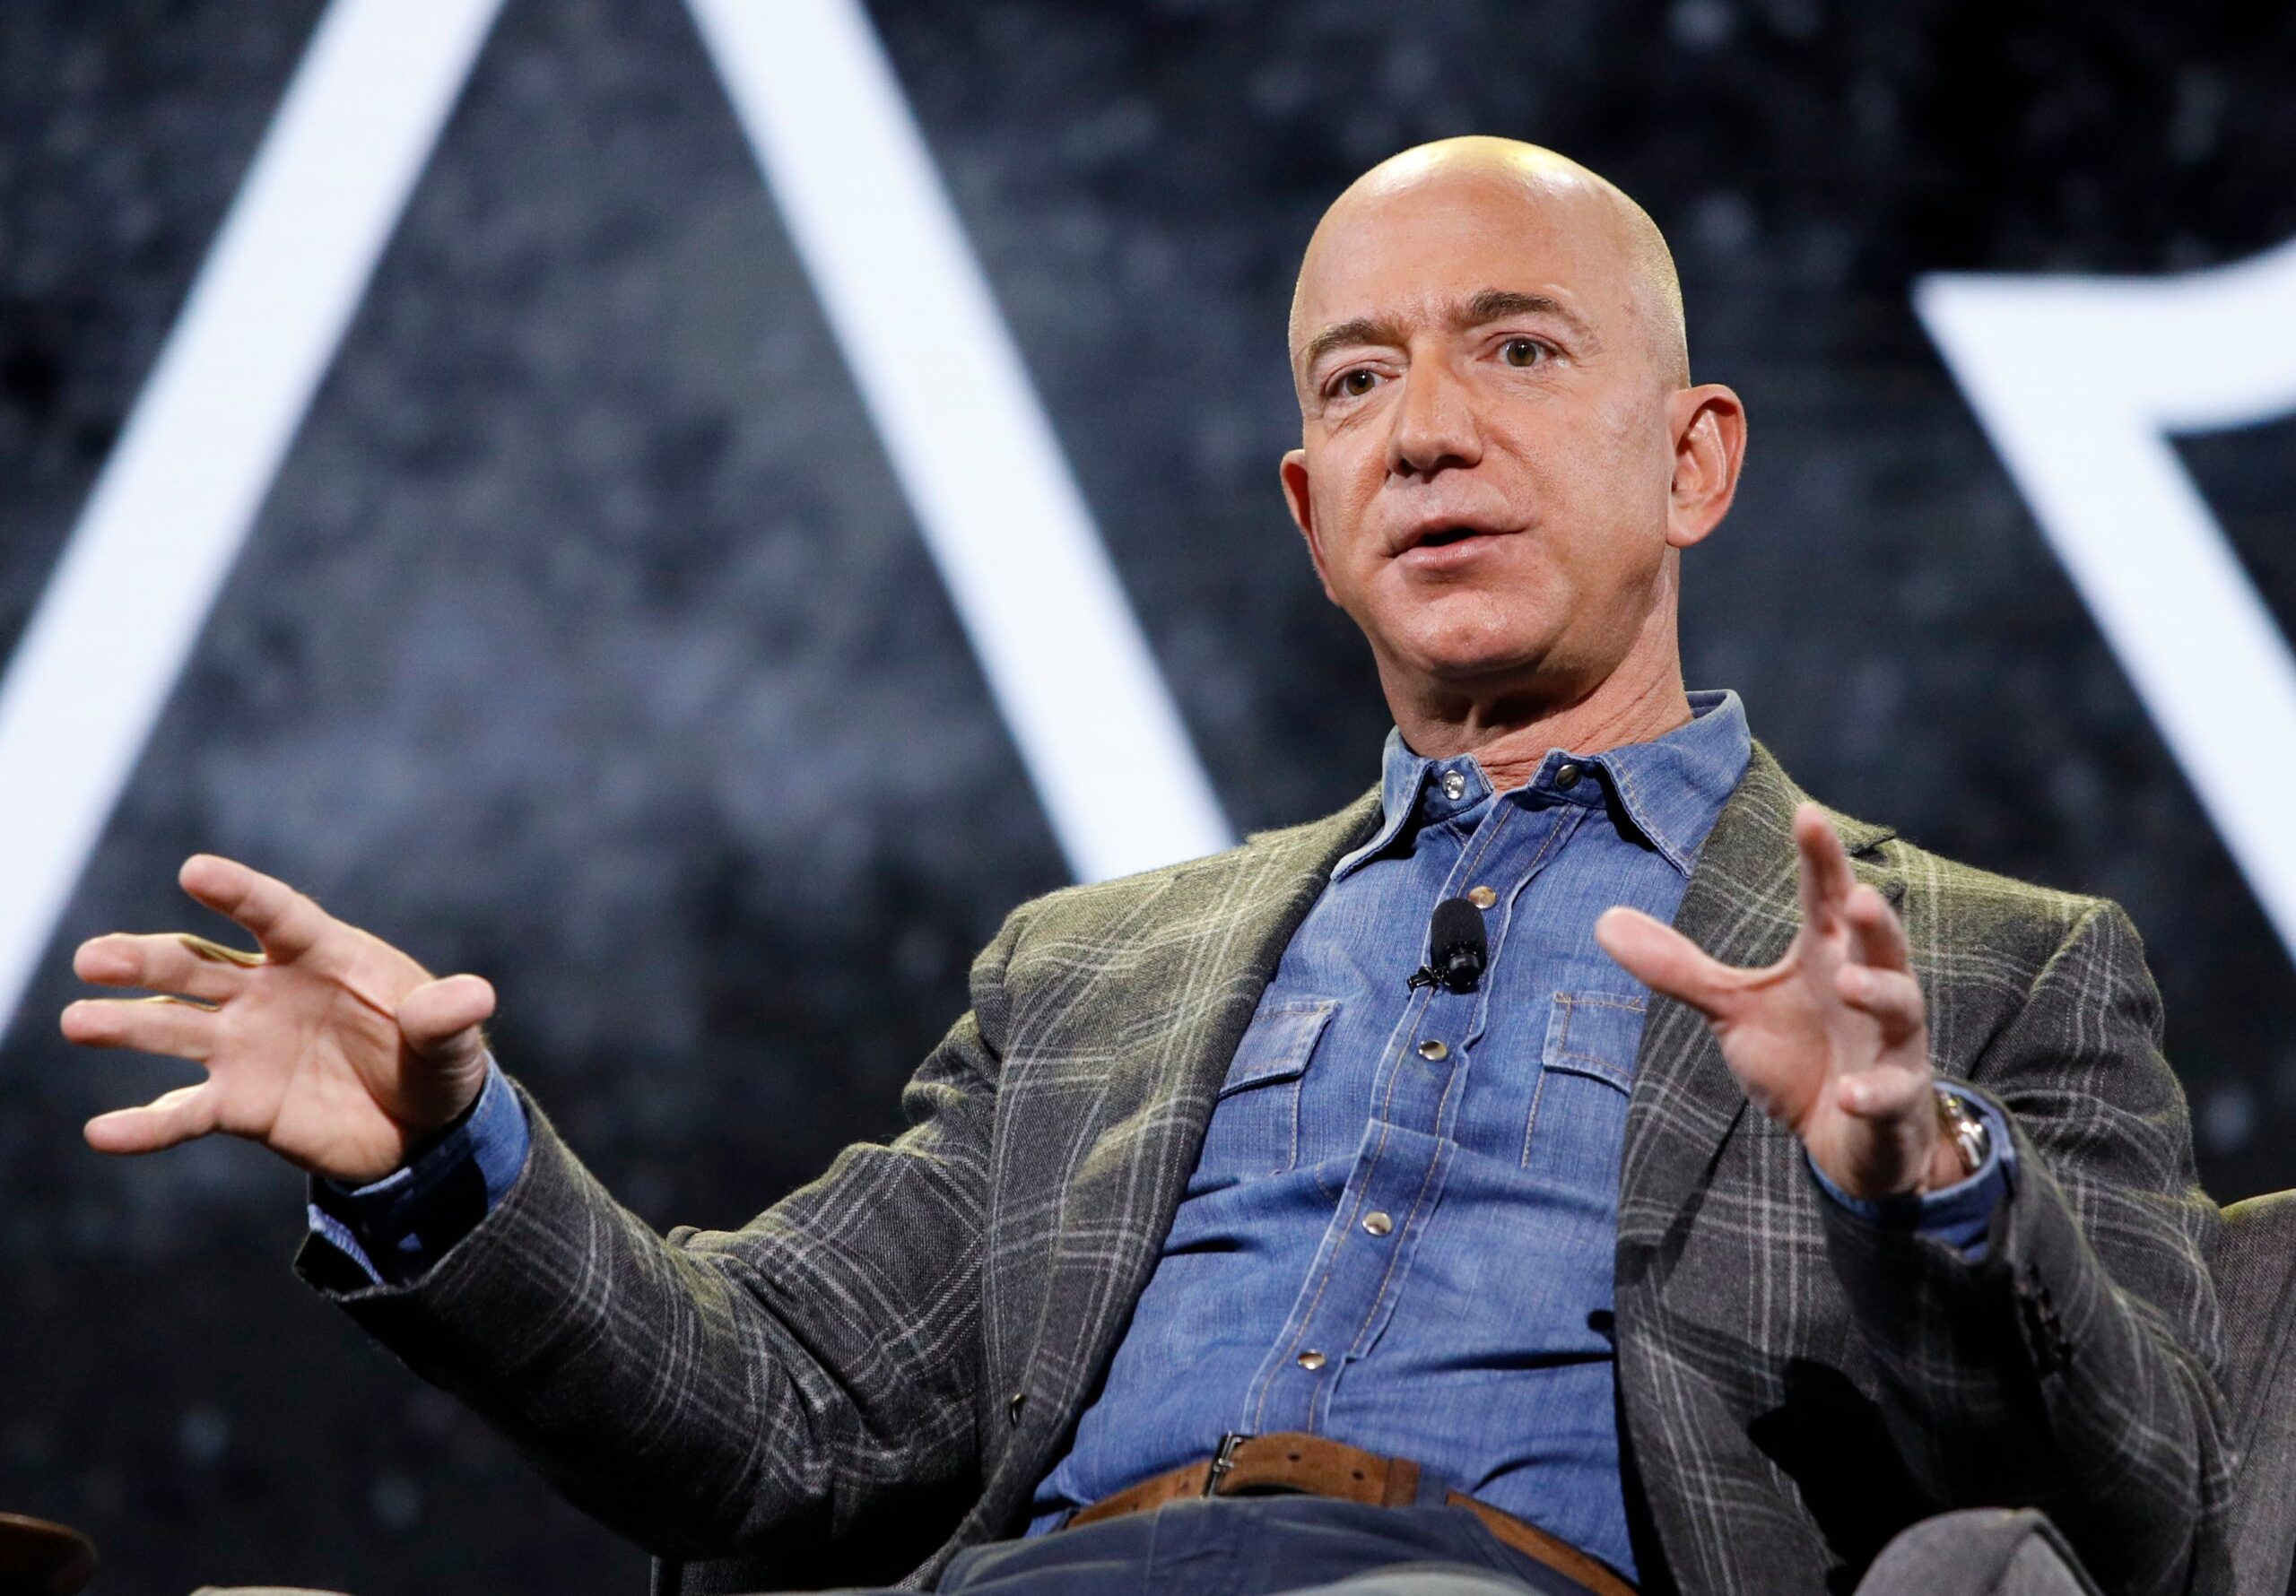 Jeff Bezos Steps Down as Amazon CEO to Focus on Other Projects